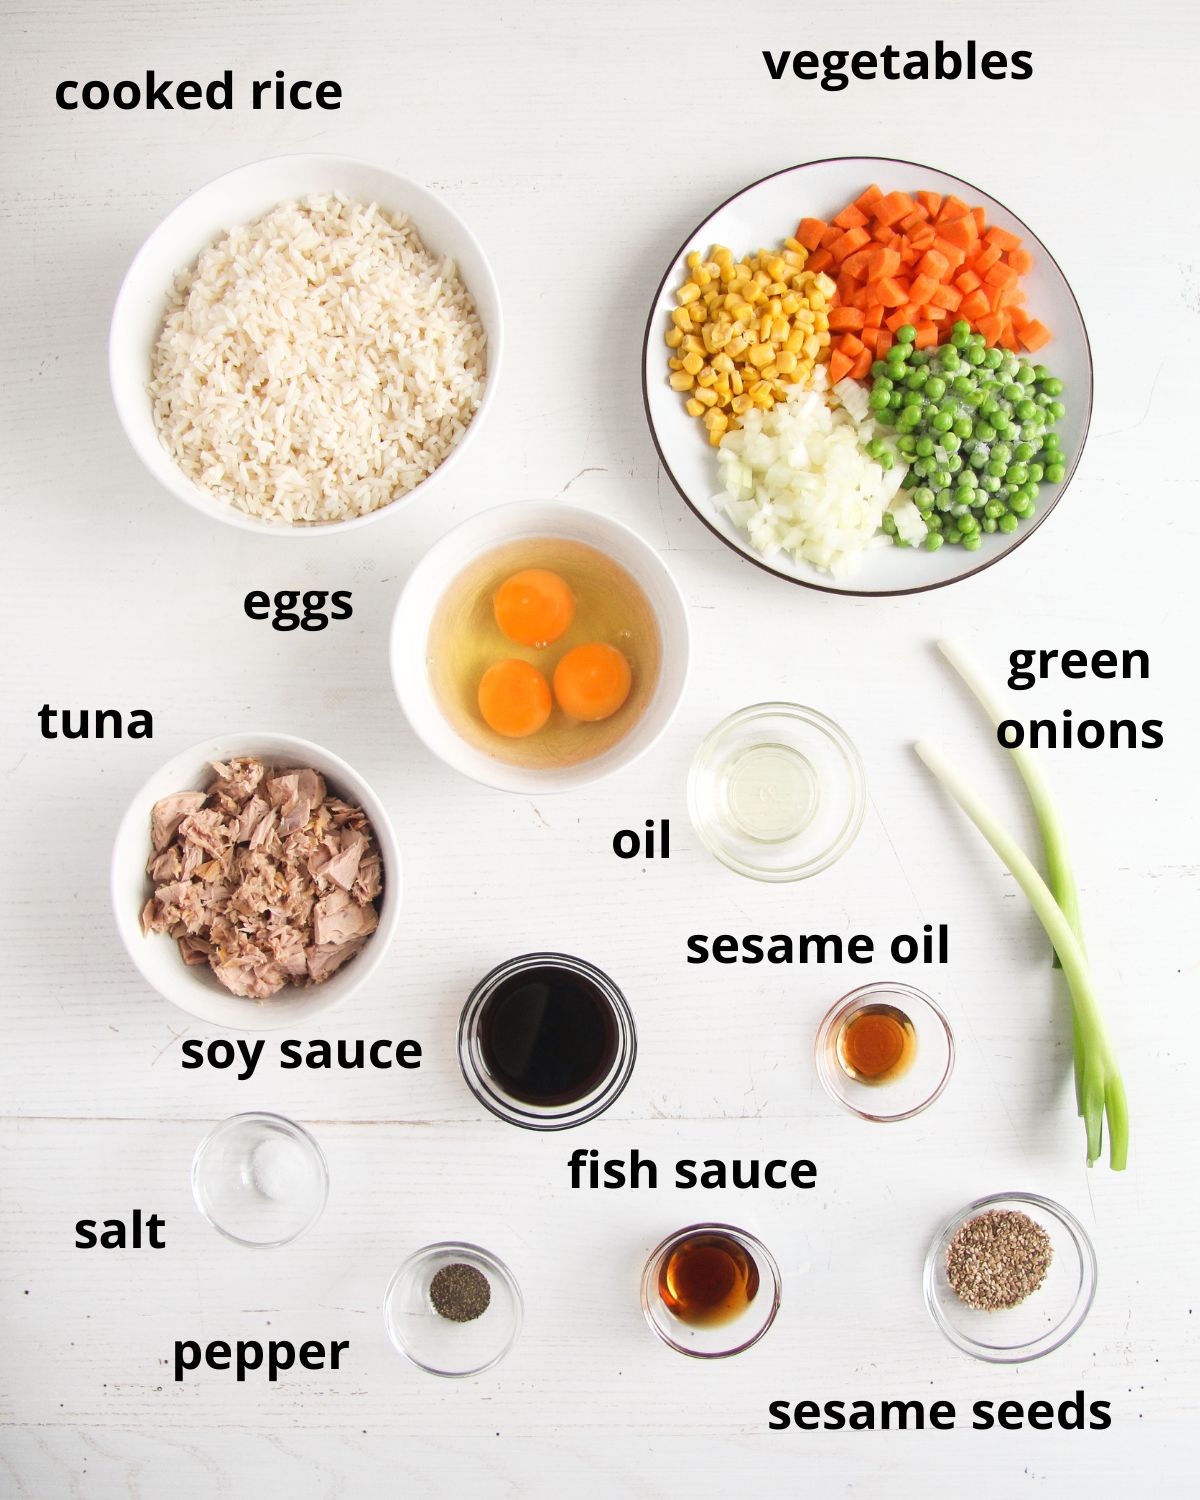 listed ingredients for cooking fried rice with tuna, vegetables and eggs.